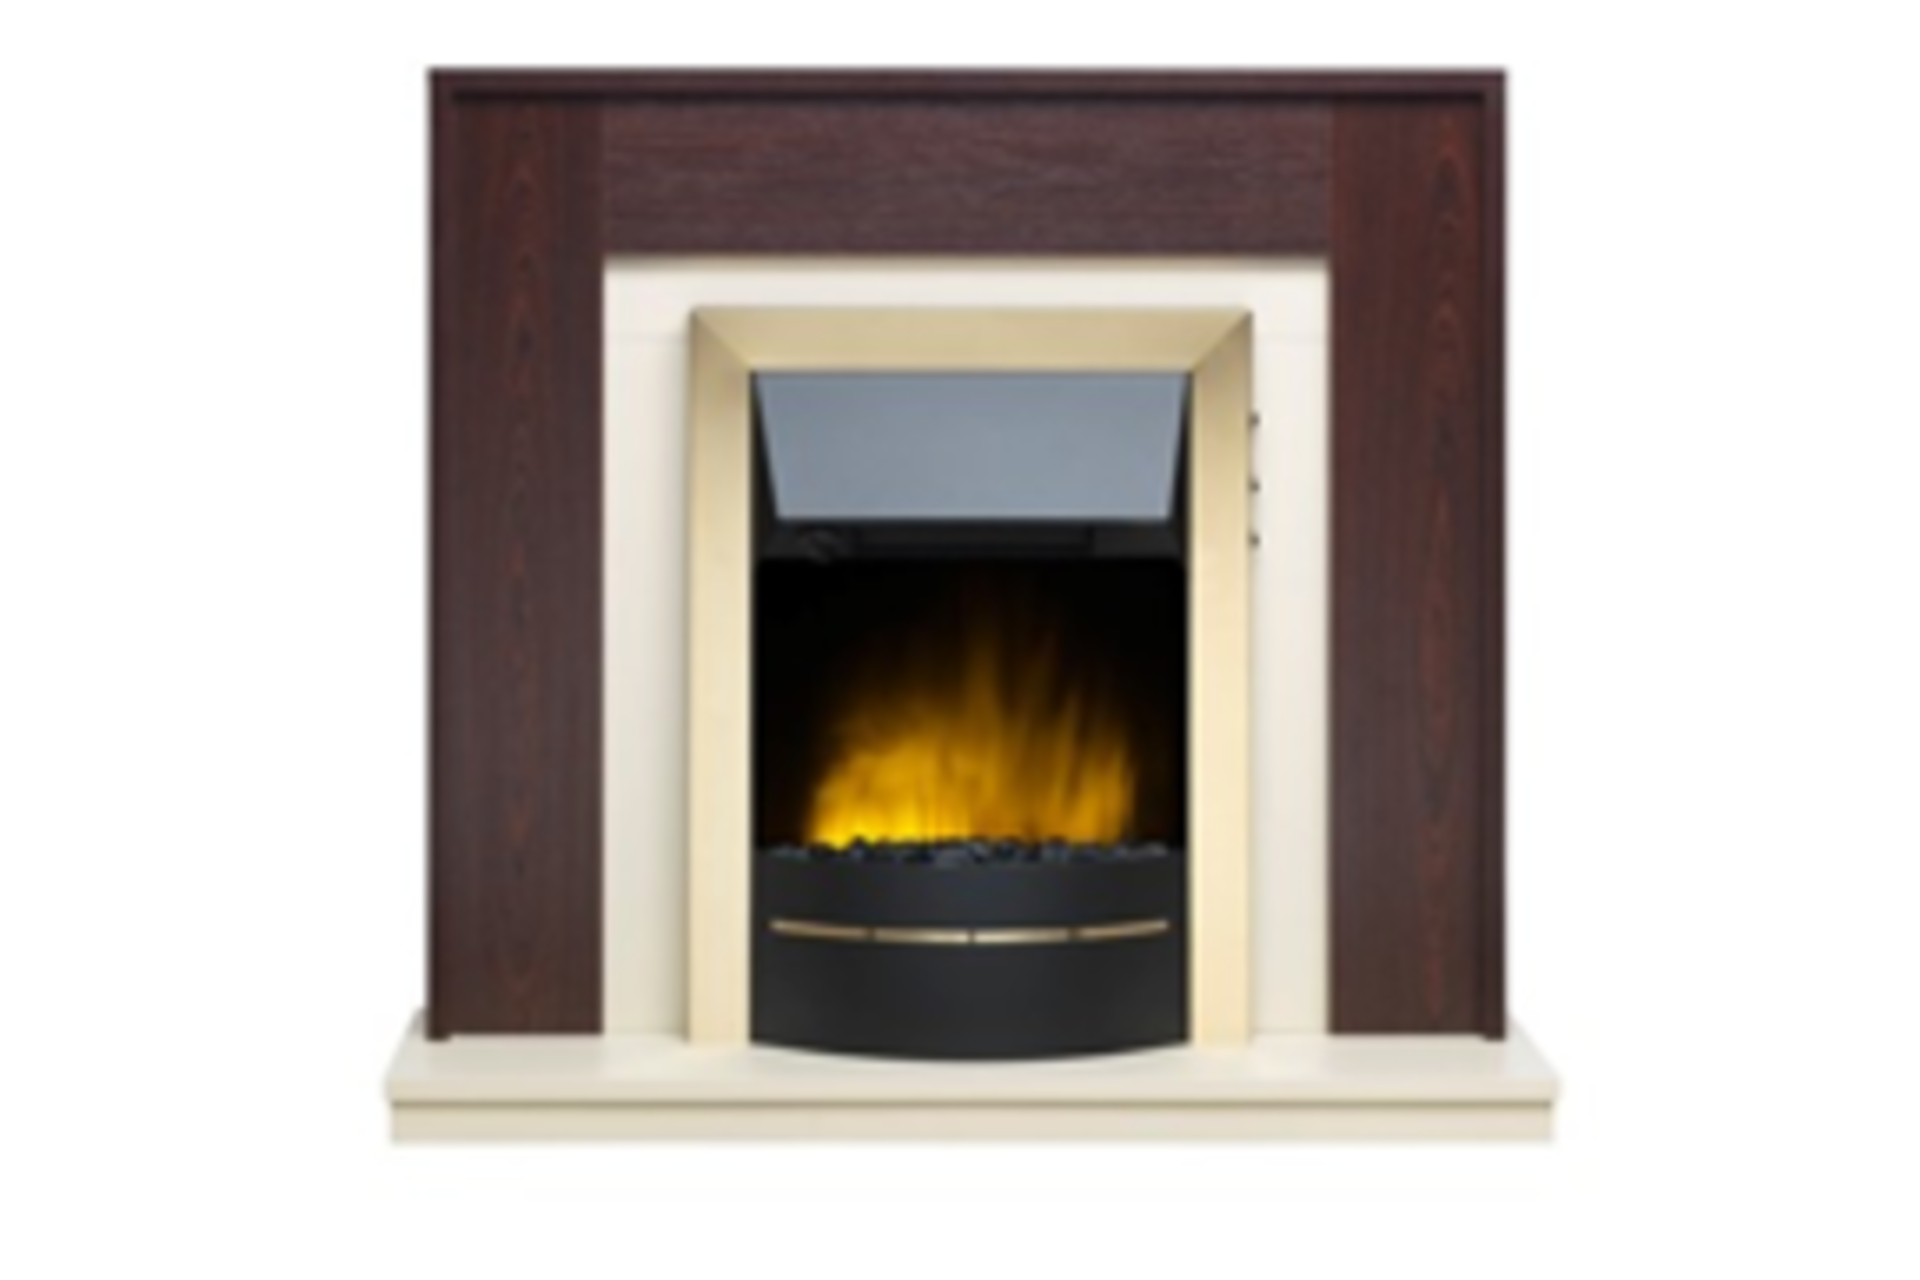 TRADE LOT 3 x New - Roma KLX Fire Suite Mahogany. RRP £599.99 each.• LED technology– expected